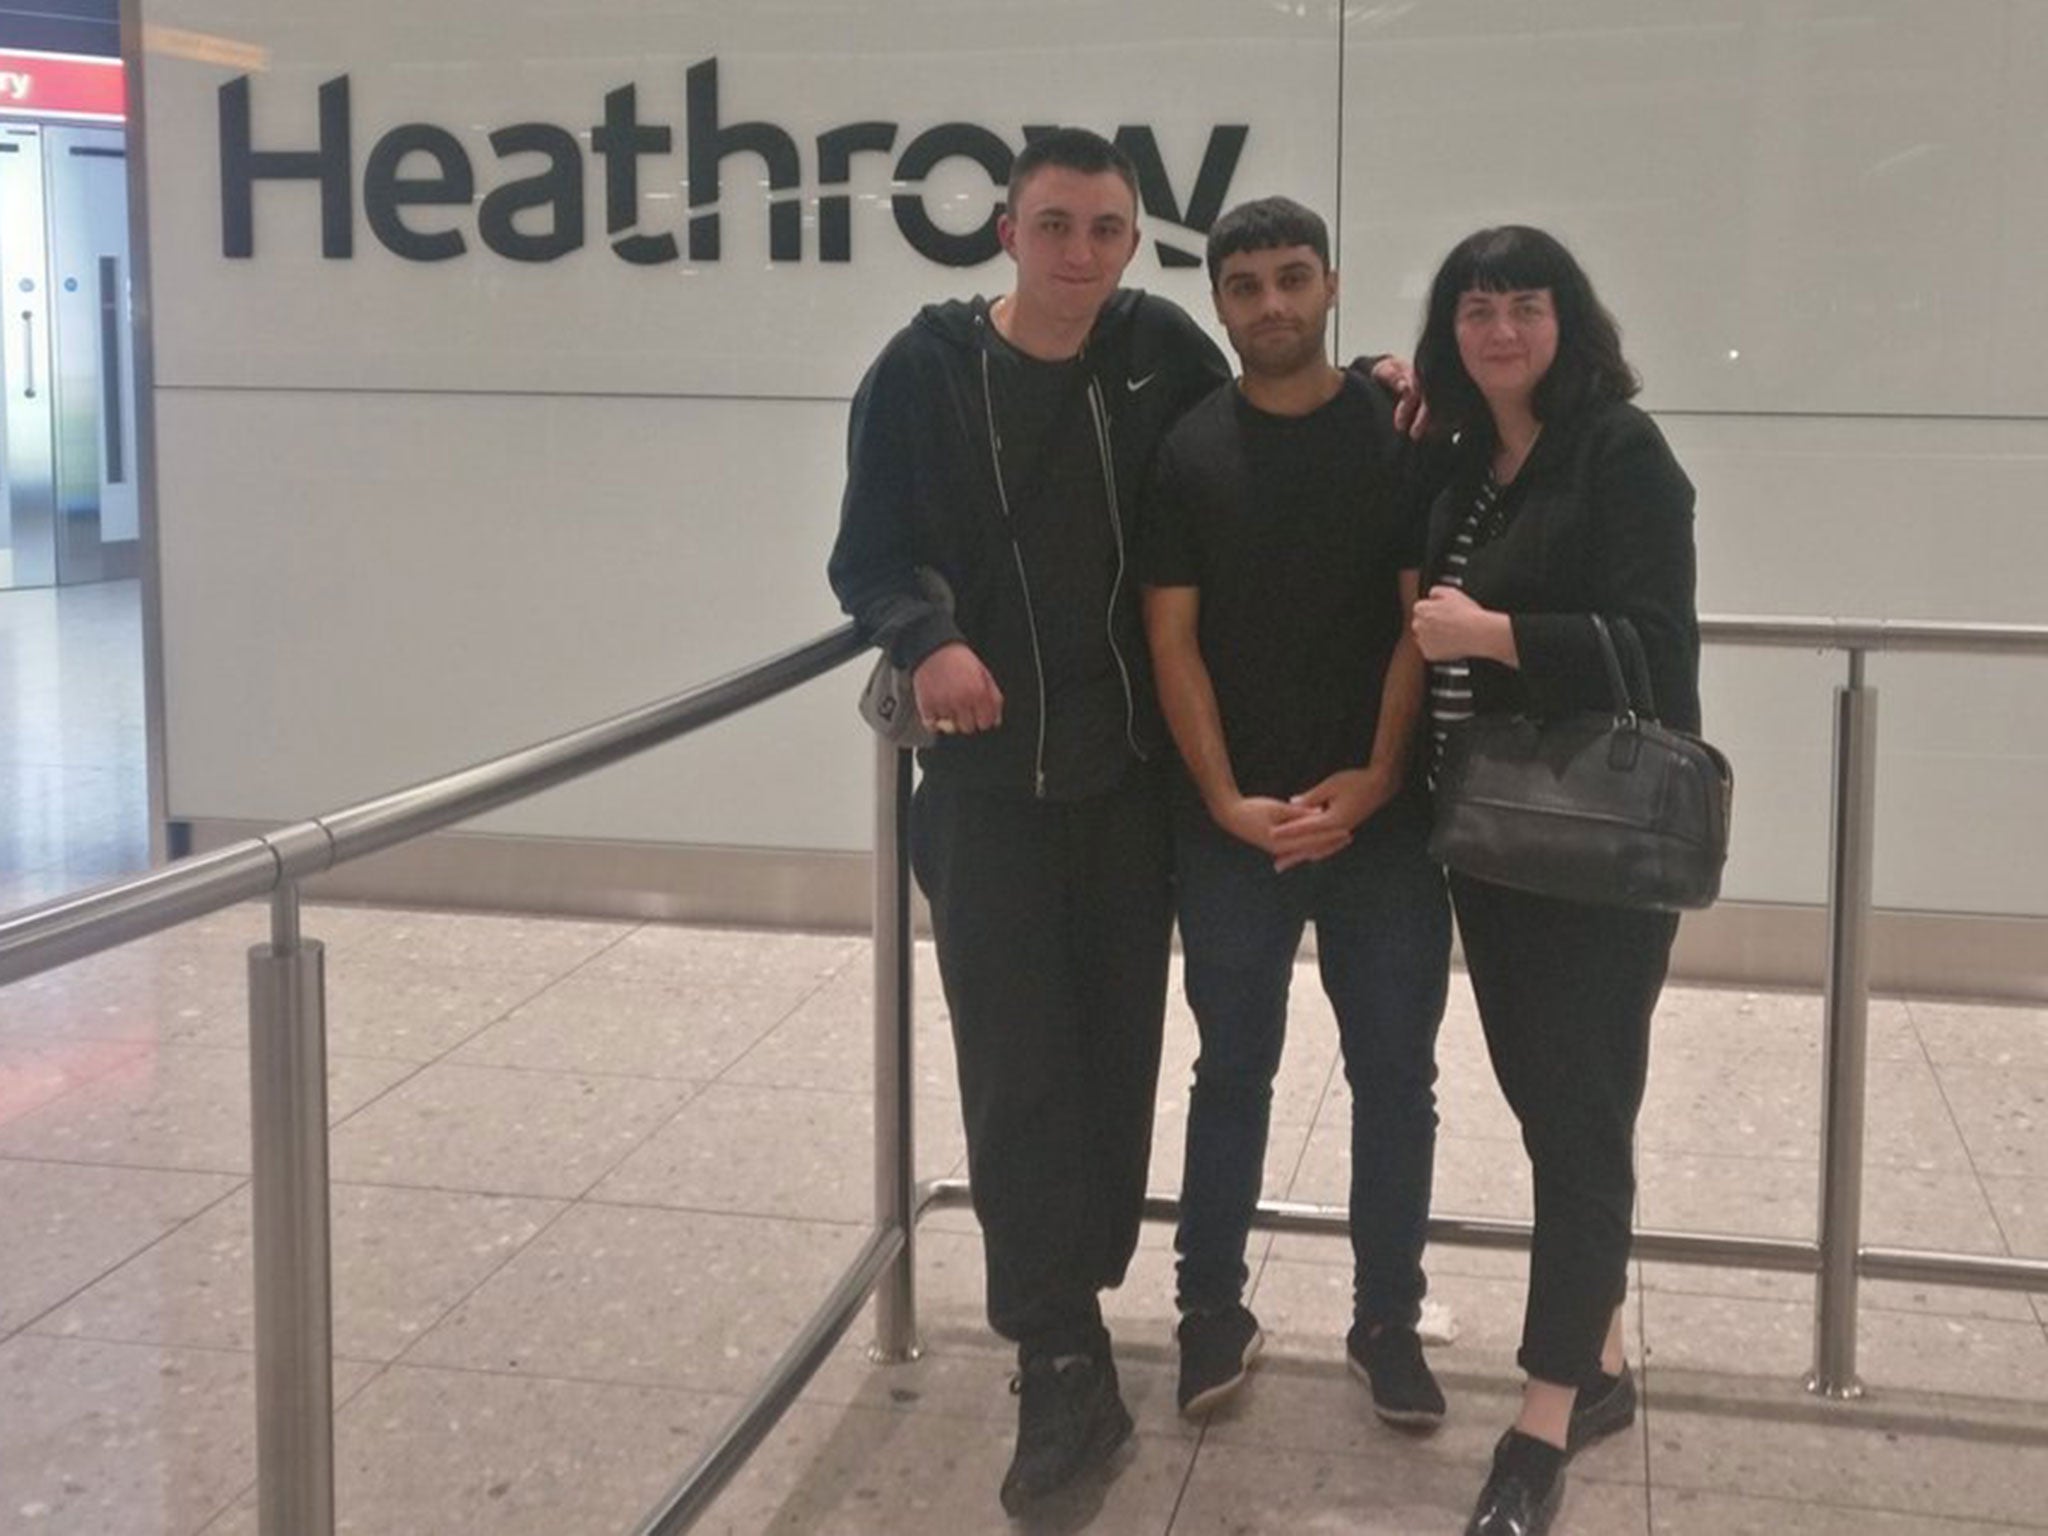 Samim Bigzad was returned to Heathrow from Kabul on 17 September (Duncan Lewis )